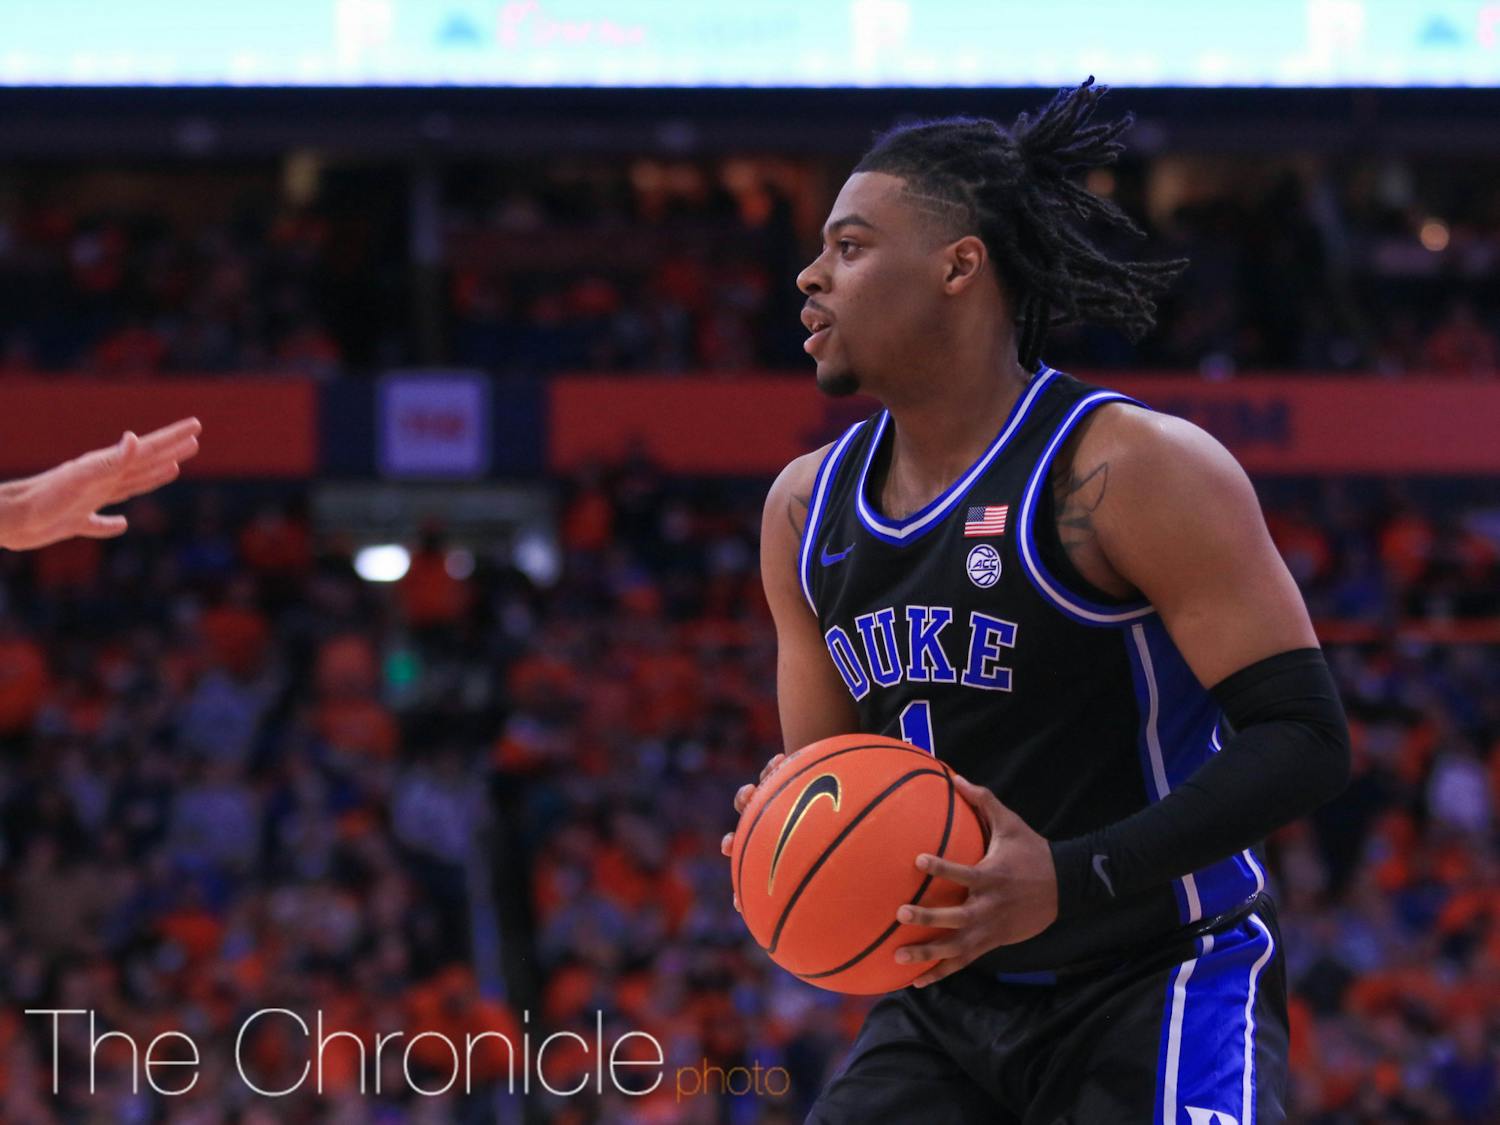 Freshman guard Trevor Keels has shown the ability to guard the perimeter while also spearheading the Blue Devils' 3-point attack.